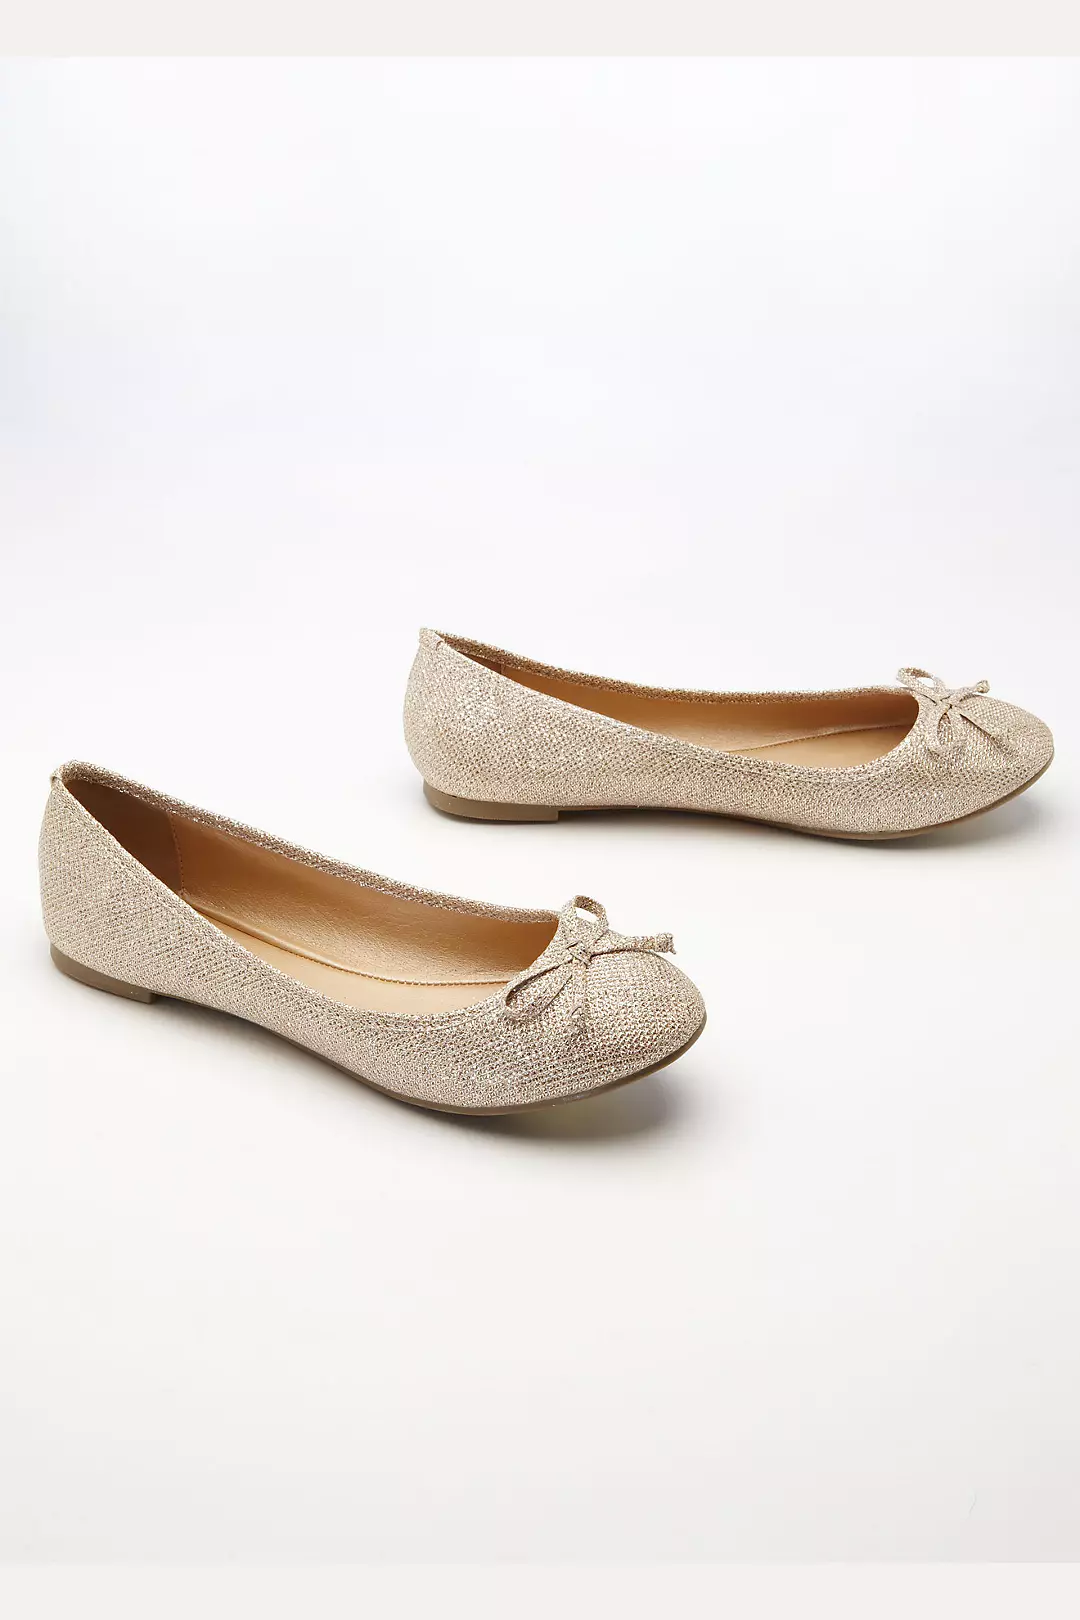 Glitter Ballet Flat with Bow Detail Image